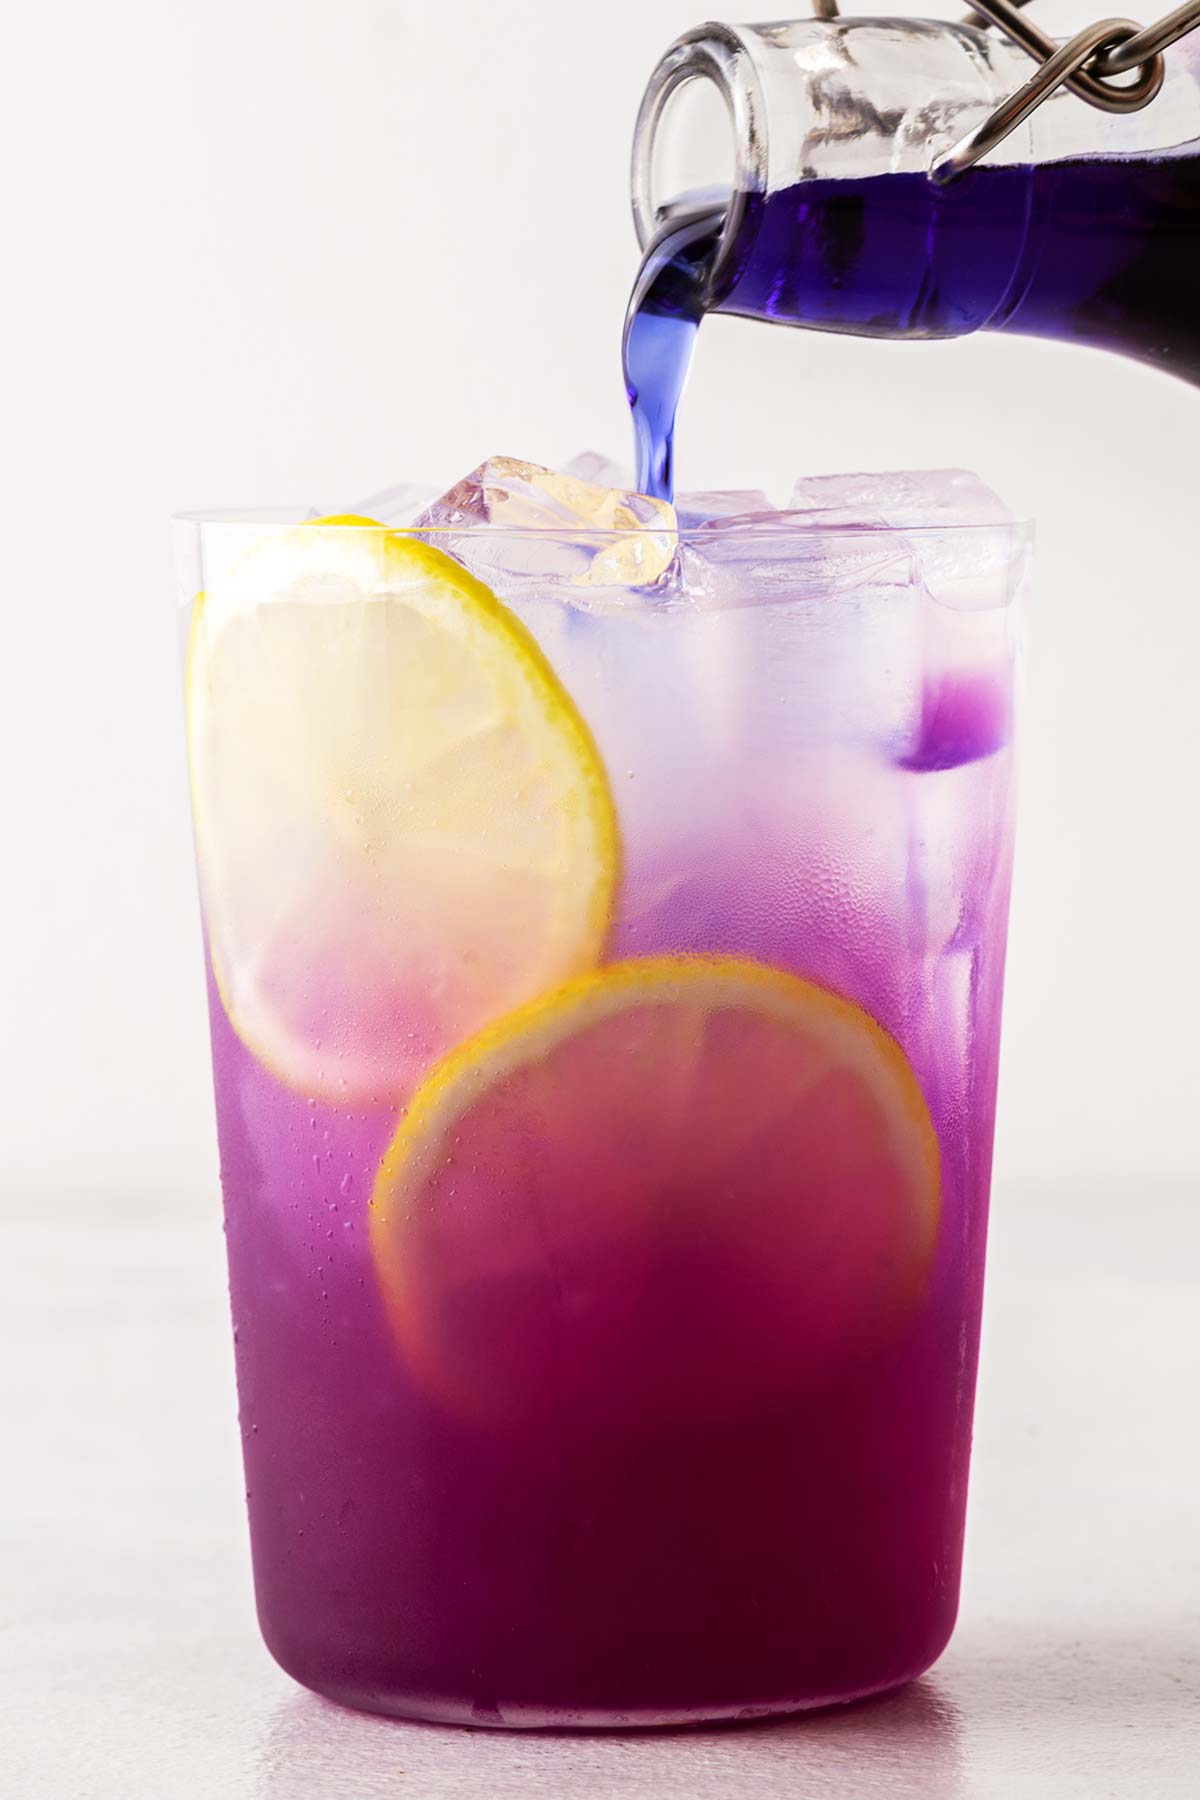 Butterfly Pea Flower Syrup being poured into a clear glass of lemonade.